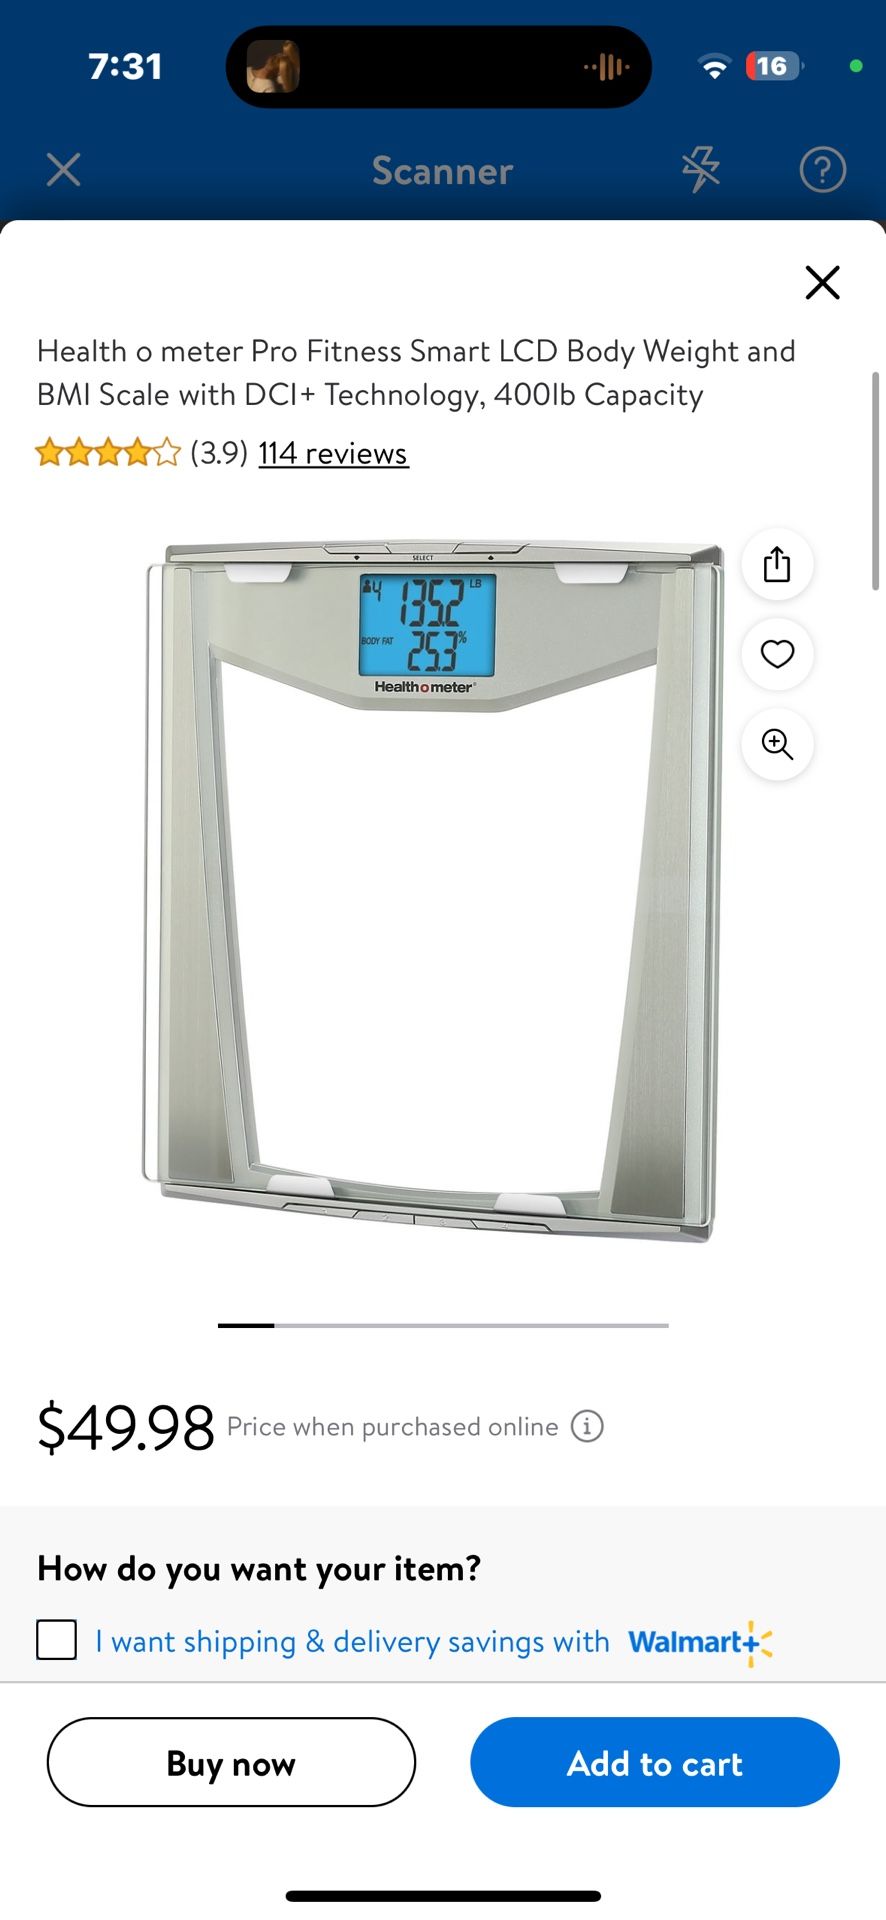 Health o meter Pro Fitness Smart LCD Body Weight and BMI Scale with DCI+ Technology, 400lb Capacity